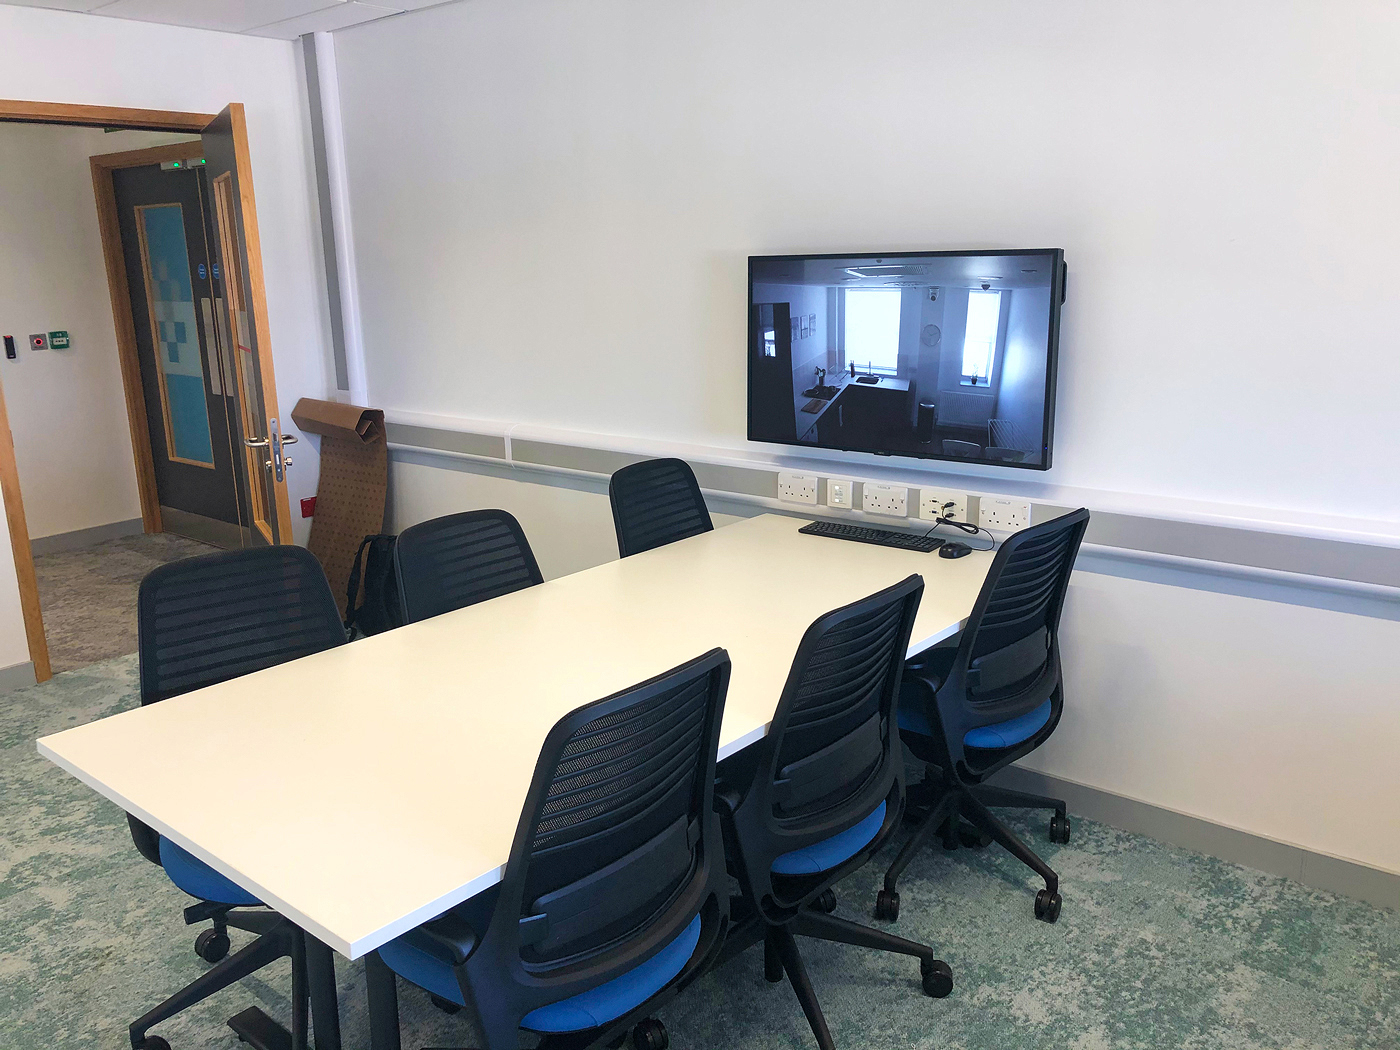 NAV Pro AVoIP encoders and decoders facilitate observation of interview room activities on the flexible classrooms' projection systems. The ProDSP audio processor and speakers facilitate two-way communication with each collaboration pod.